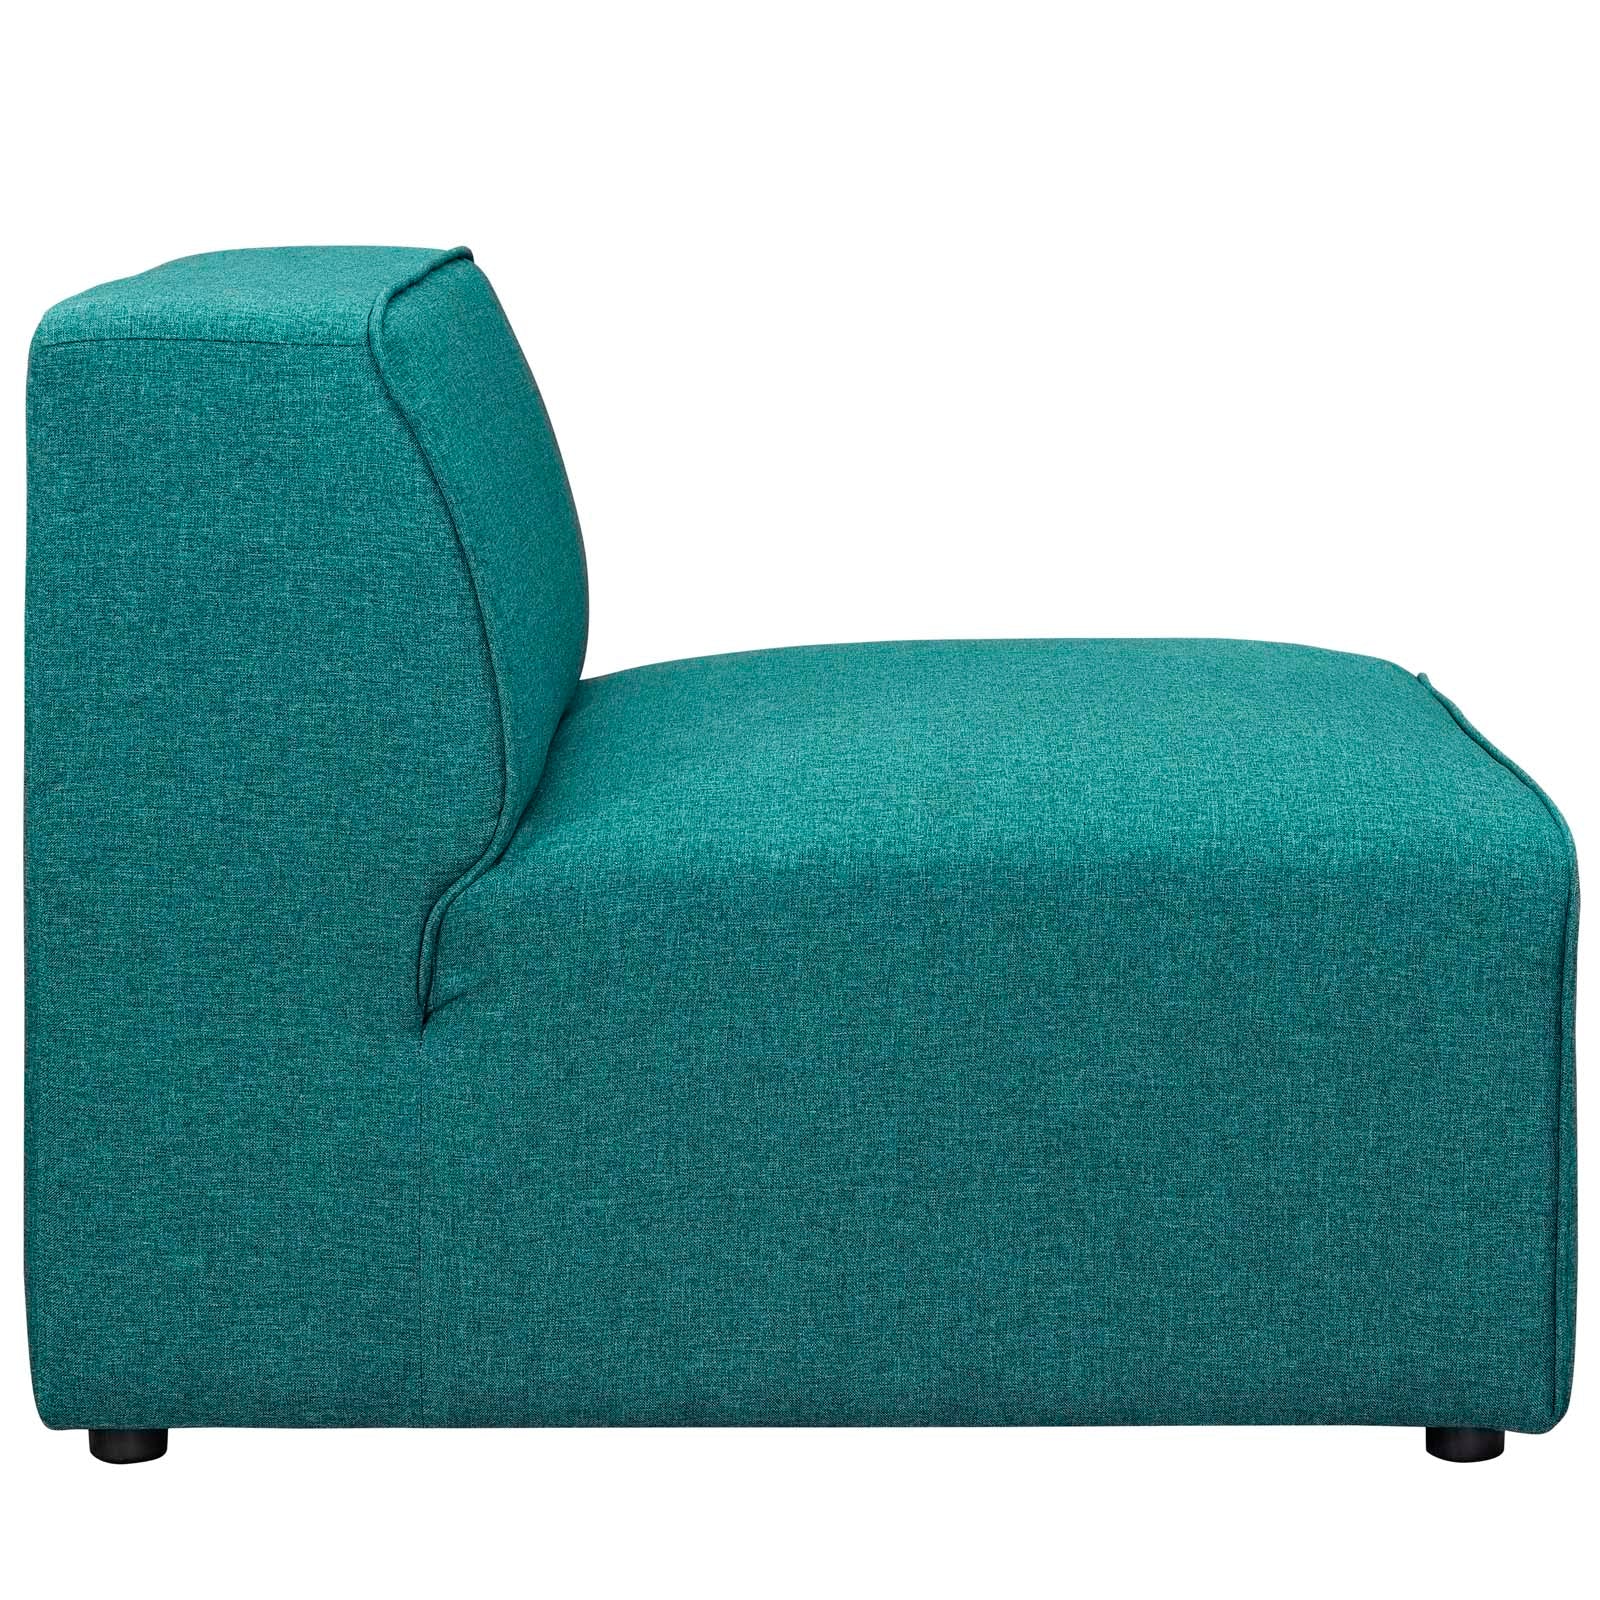 Modway Sectional Sofas - Mingle 7 Piece Upholstered 140.5"W Fabric Sectional Sofa Set Teal